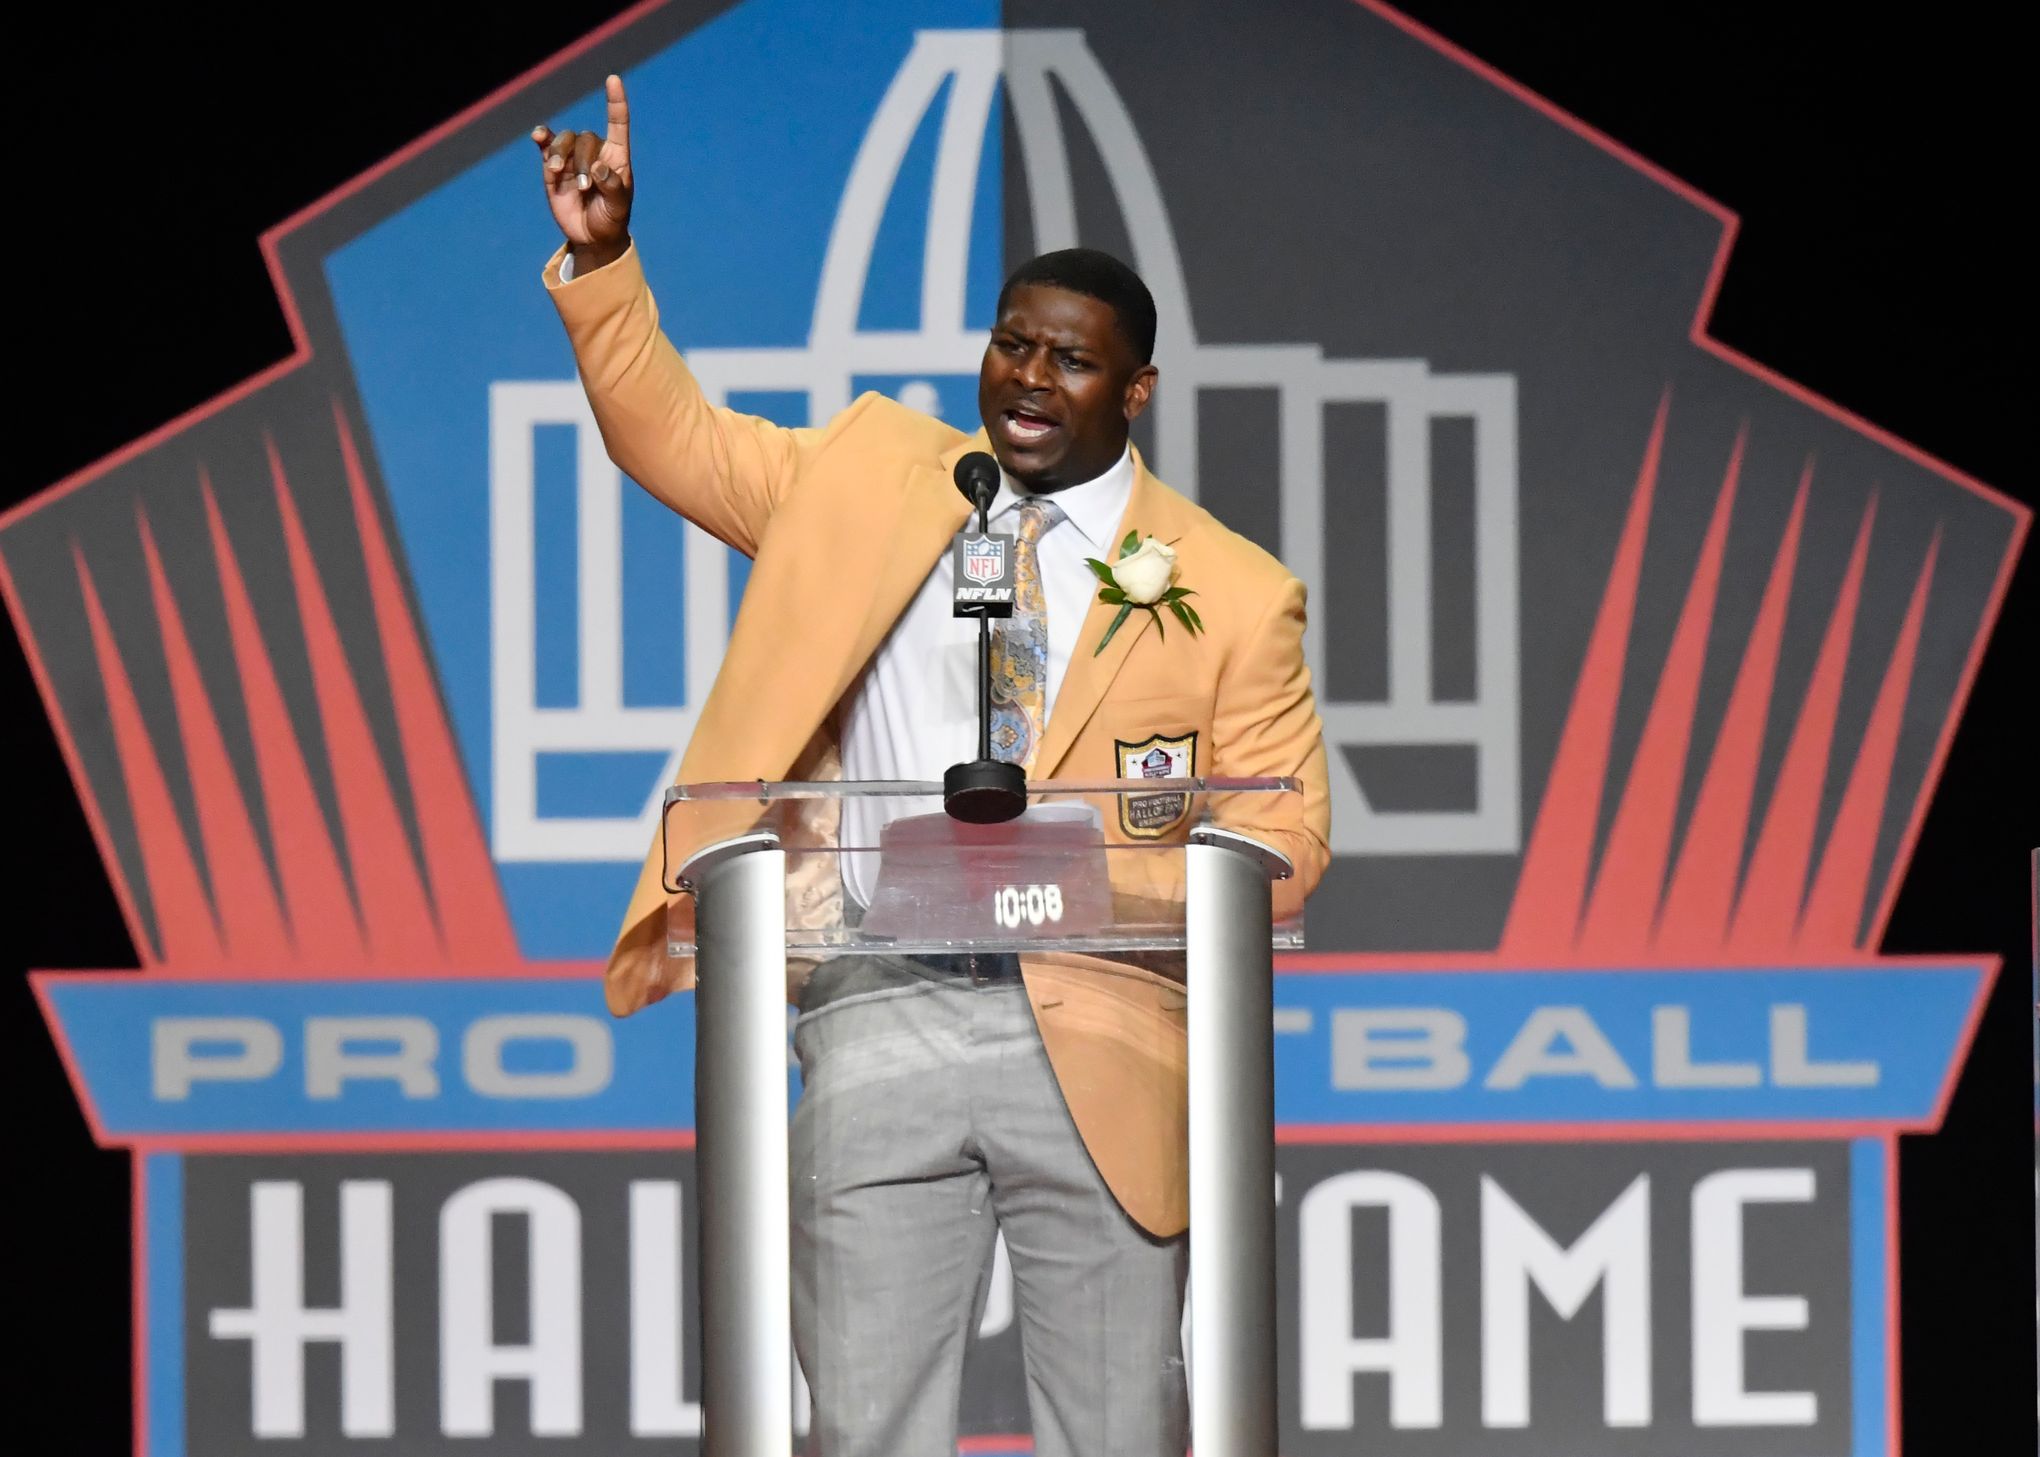 LaDainian Tomlinson and Kurt Warner Make the Hall of Fame With 5 Others -  The New York Times